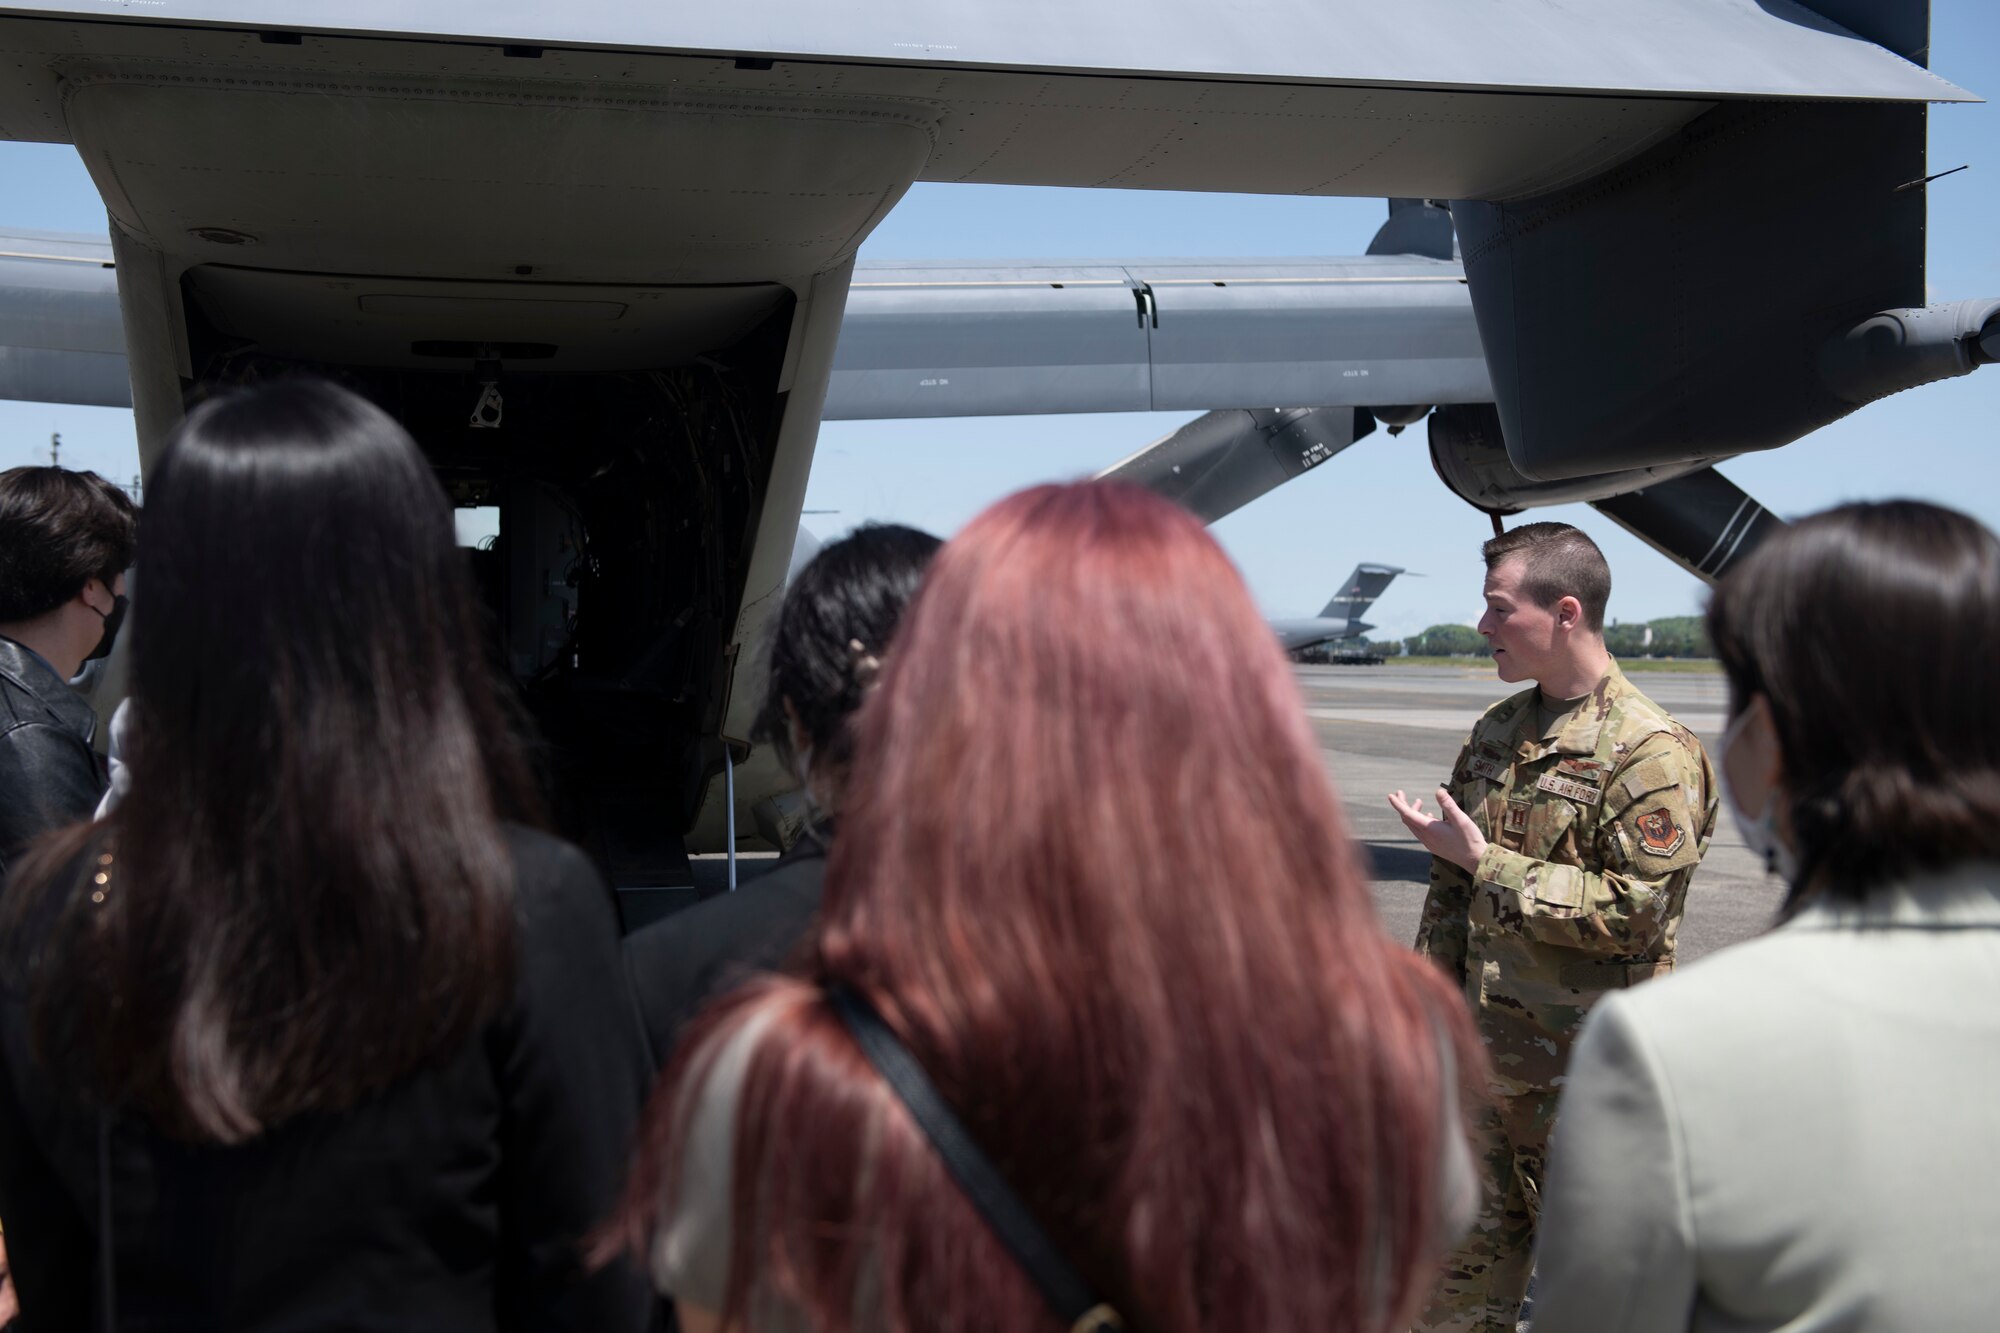 Capt. Andrew Smith, 21st Special Operations Squadron pilot, explains the 21st SOS mission and CV-22 Osprey capabilities during an Ambassador’s Youth Council tour at Yokota Air Base, Japan, April 22, 2022. The AYC received information on how the 374th Airlift Wing operates and supports tenant units include the 21st SOS and Japan Air Self-Defense Force. (U.S. Air Force photo by Tech. Sgt. Joshua Edwards)